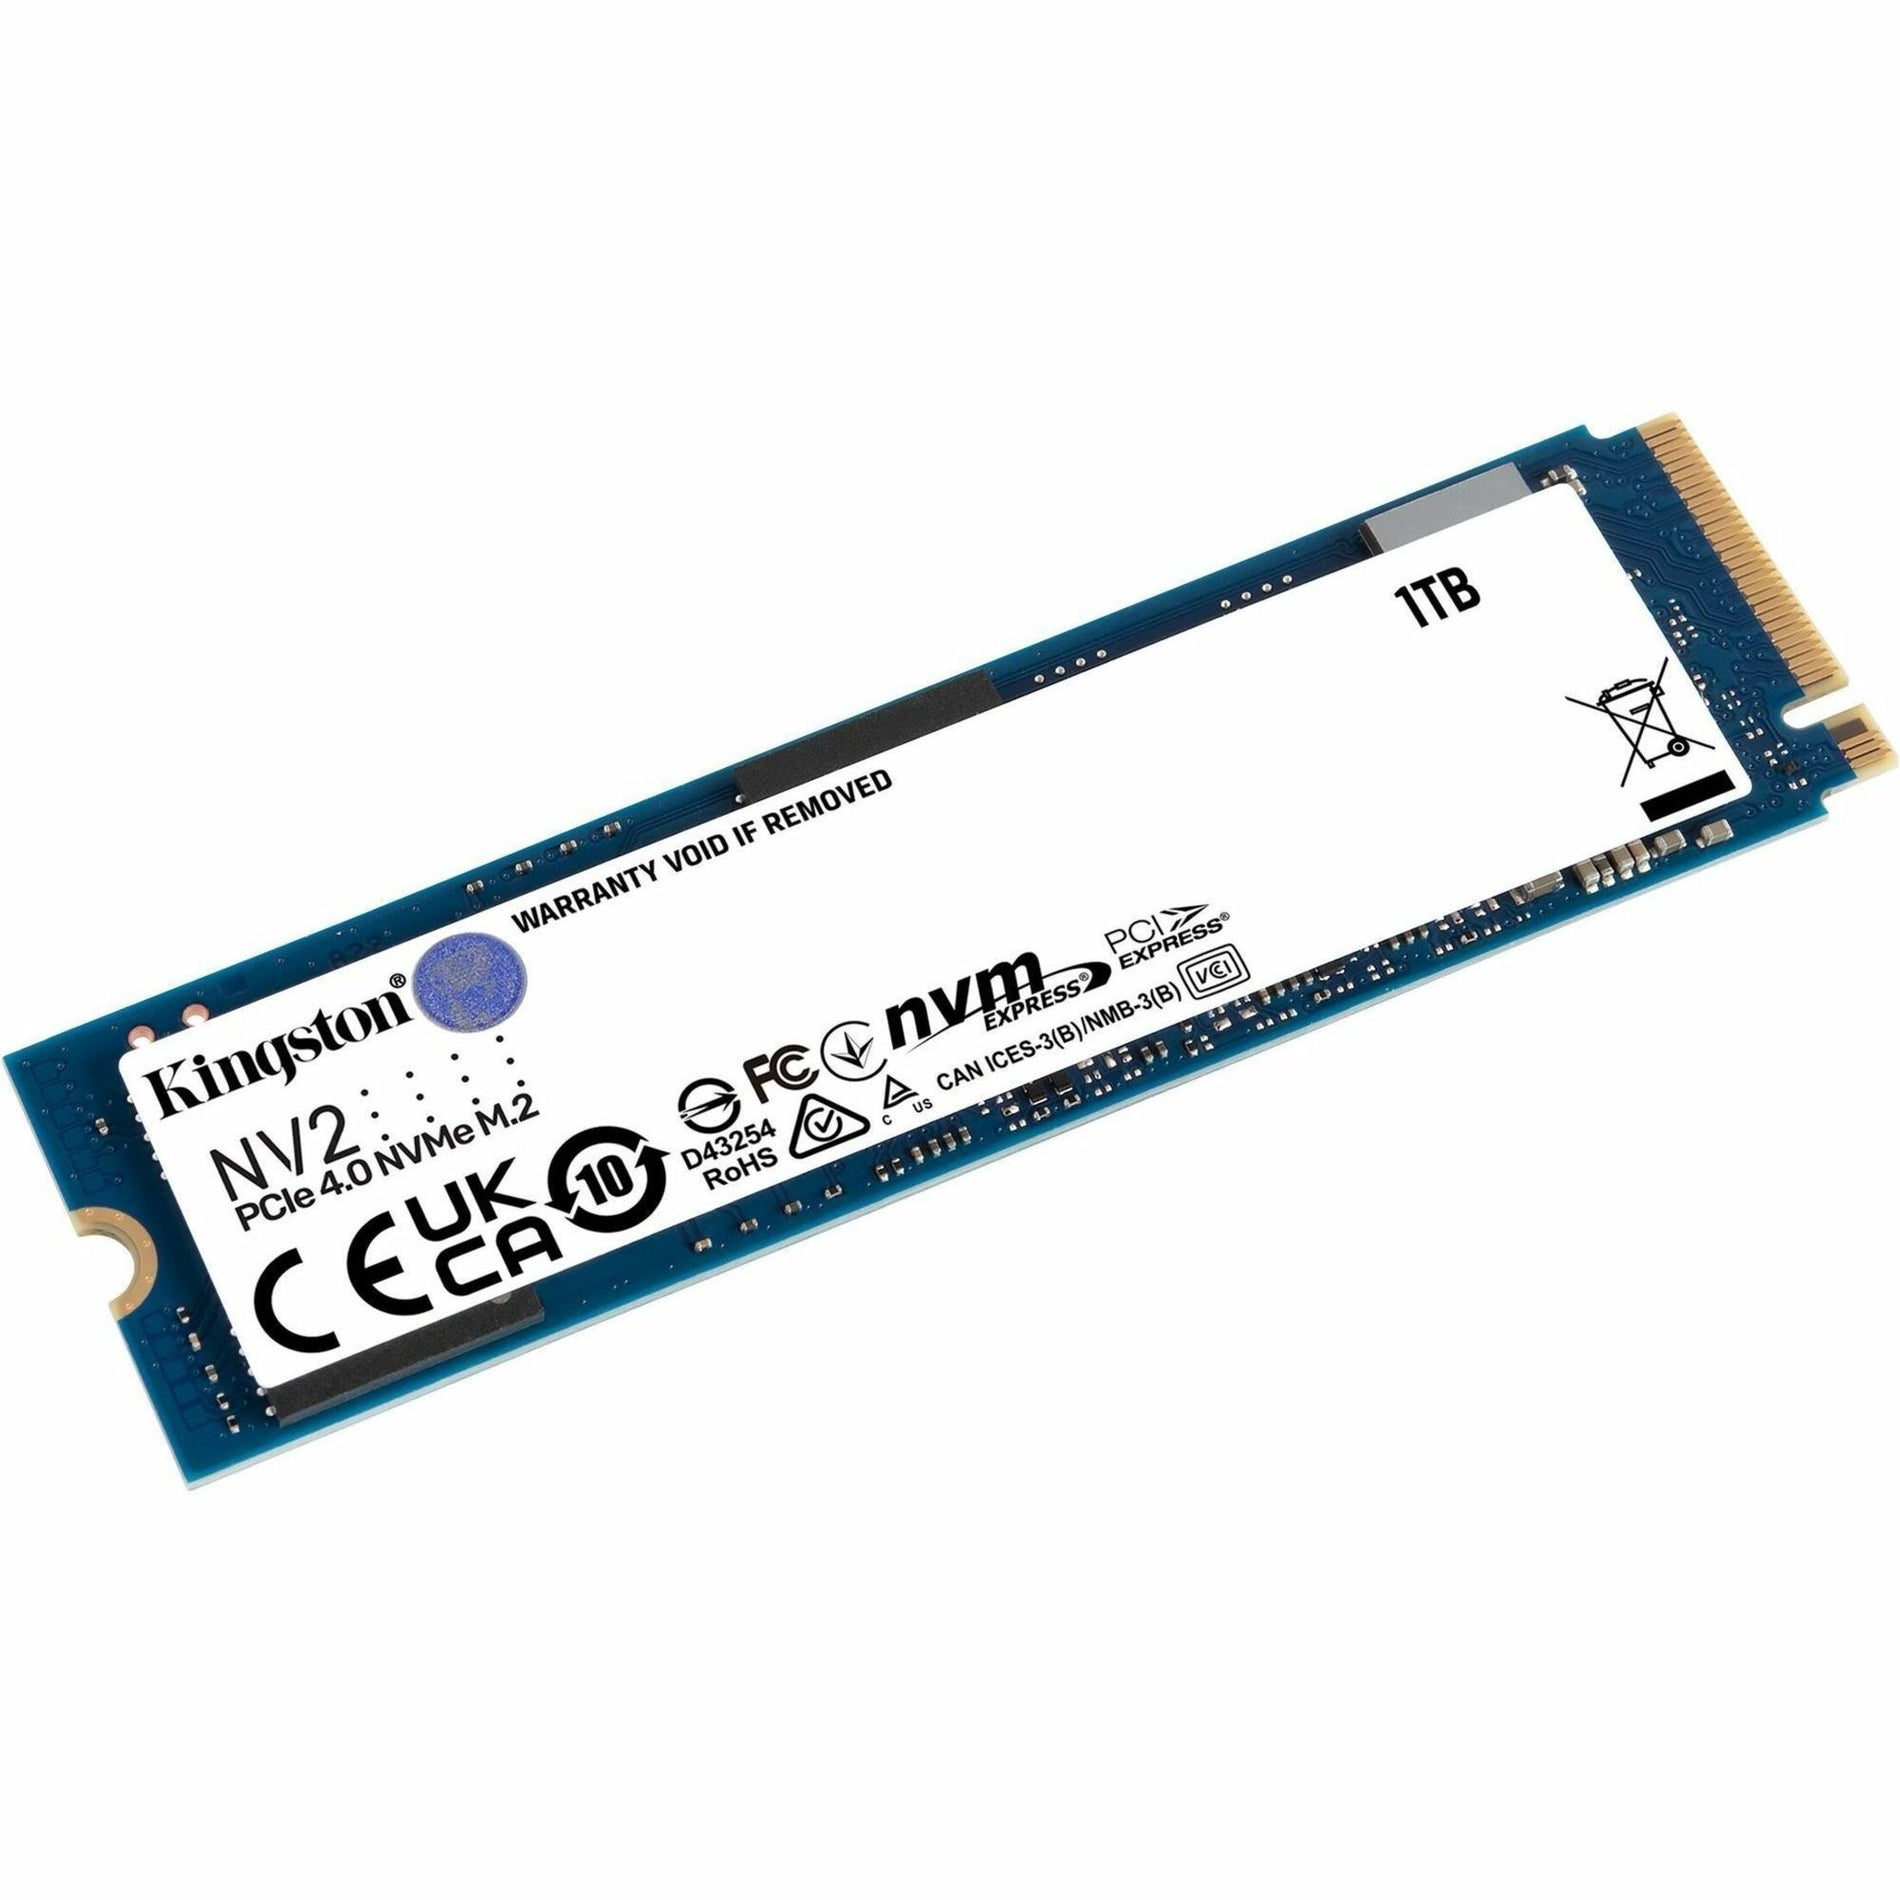 Kingston SNV2S/1000GBK NV2 Solid State Drive, 1 TB, PCIe NVMe 4.0, 3500 MB/s Read, 2100 MB/s Write